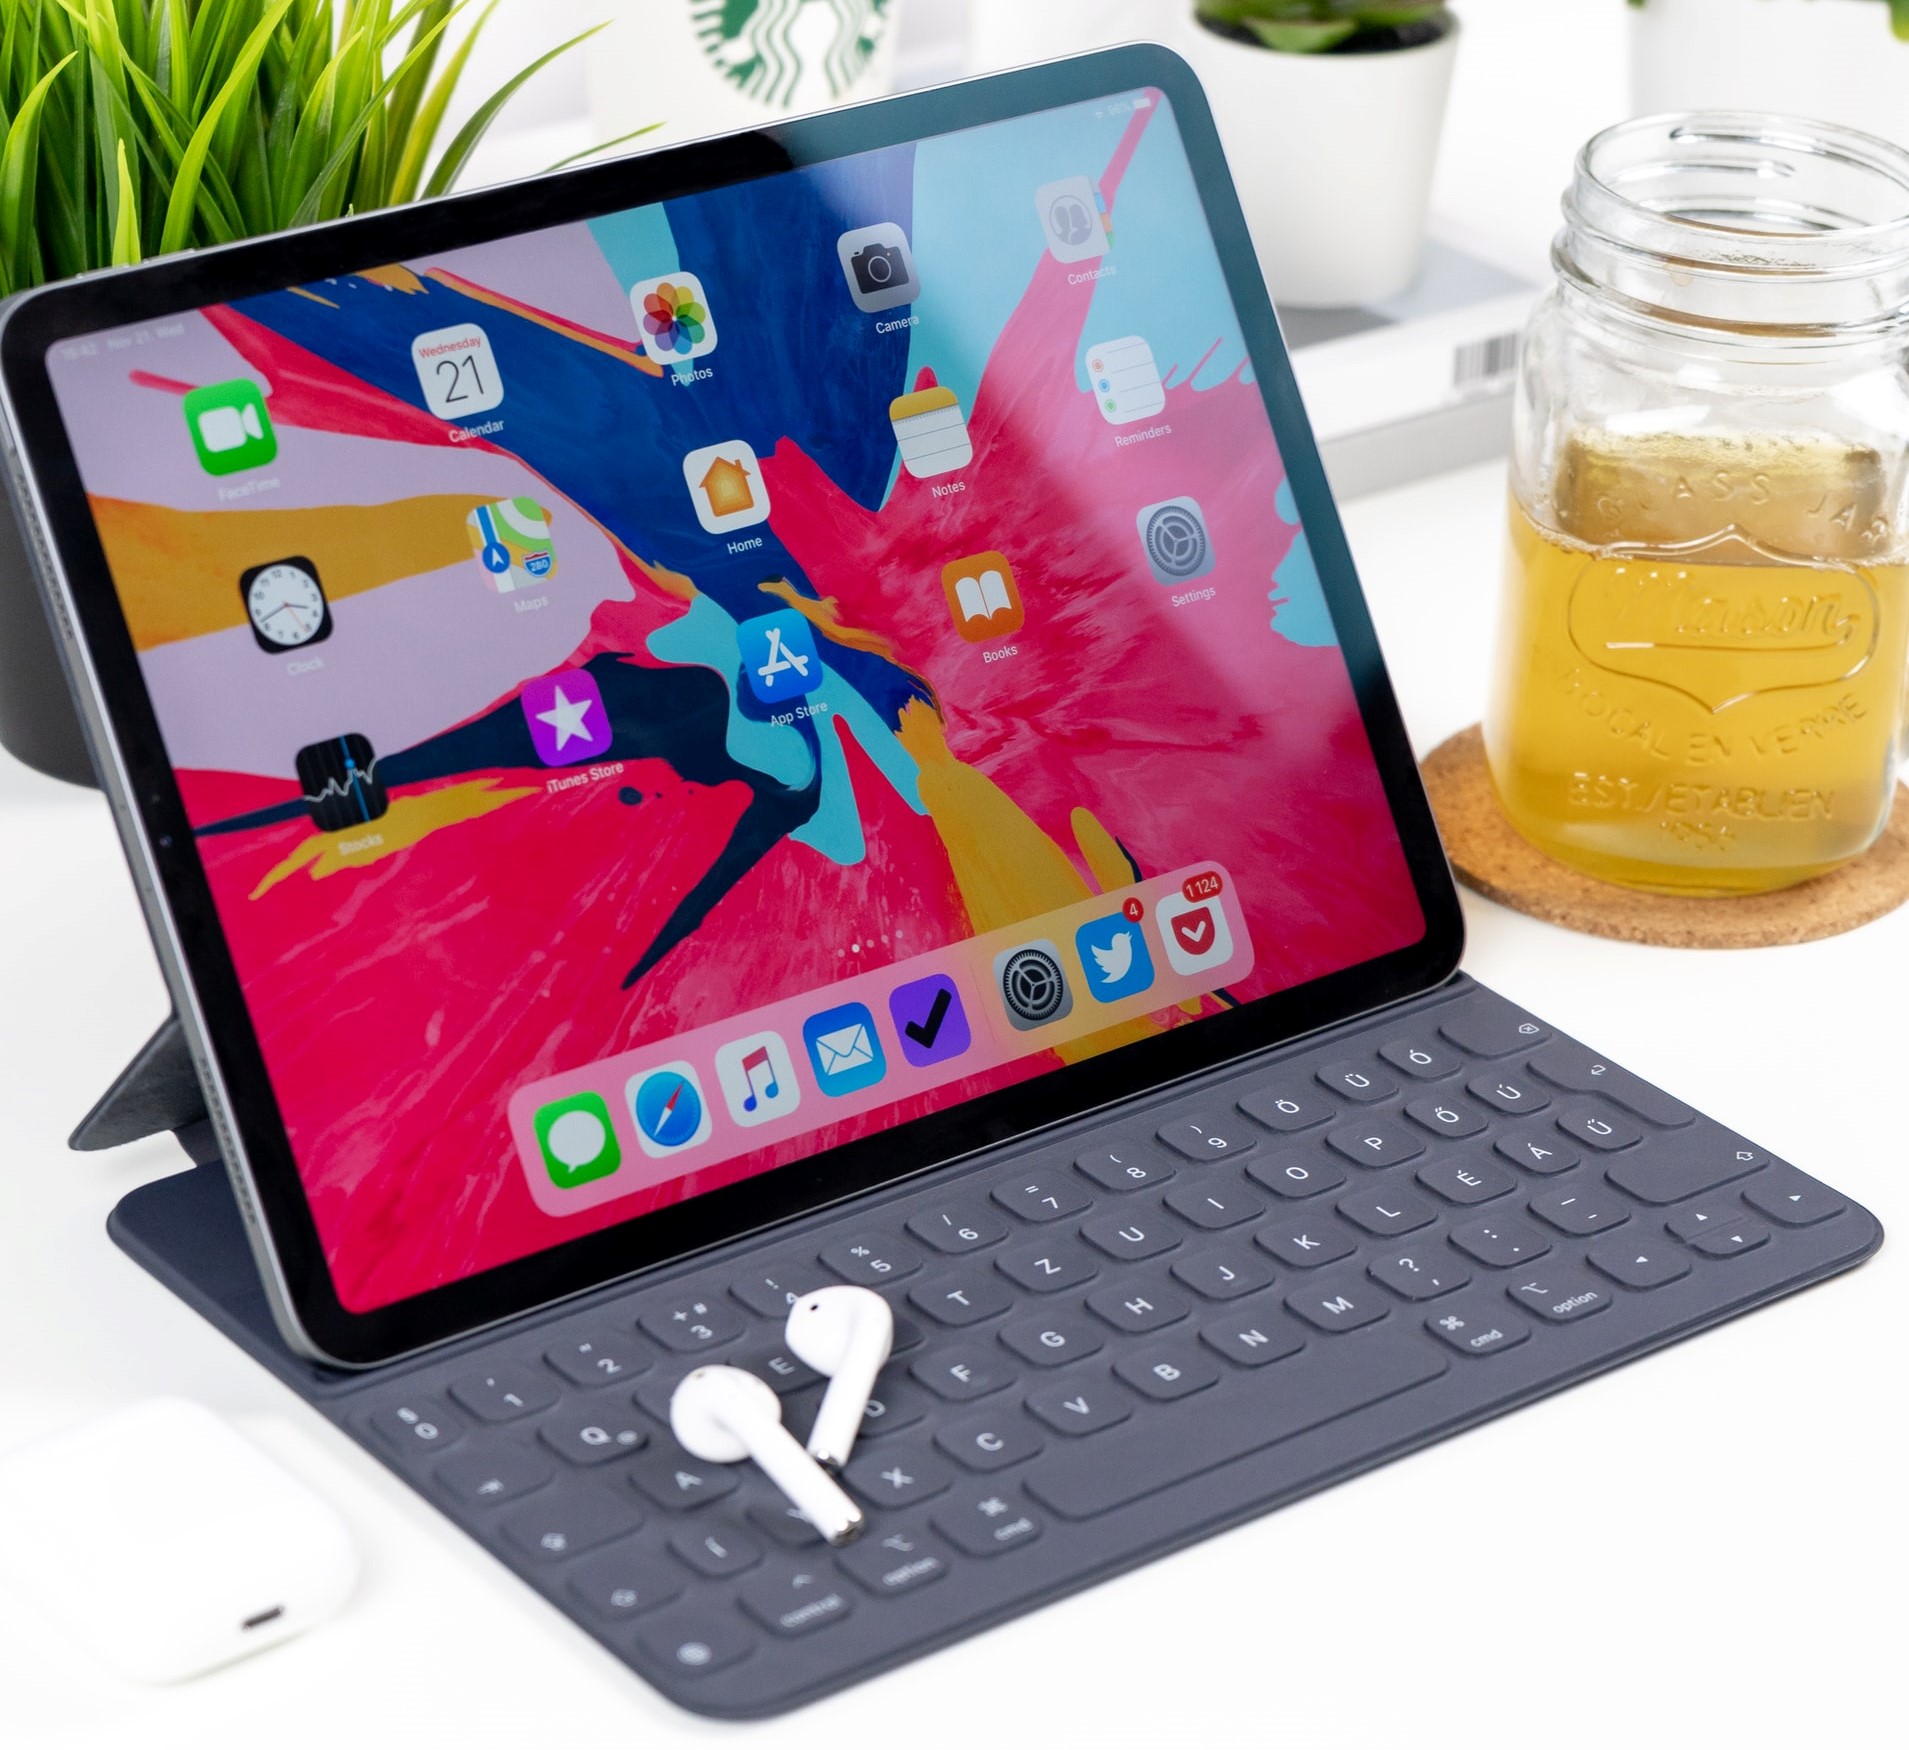 Refurbished Apple iPads – Why you should buy one? 